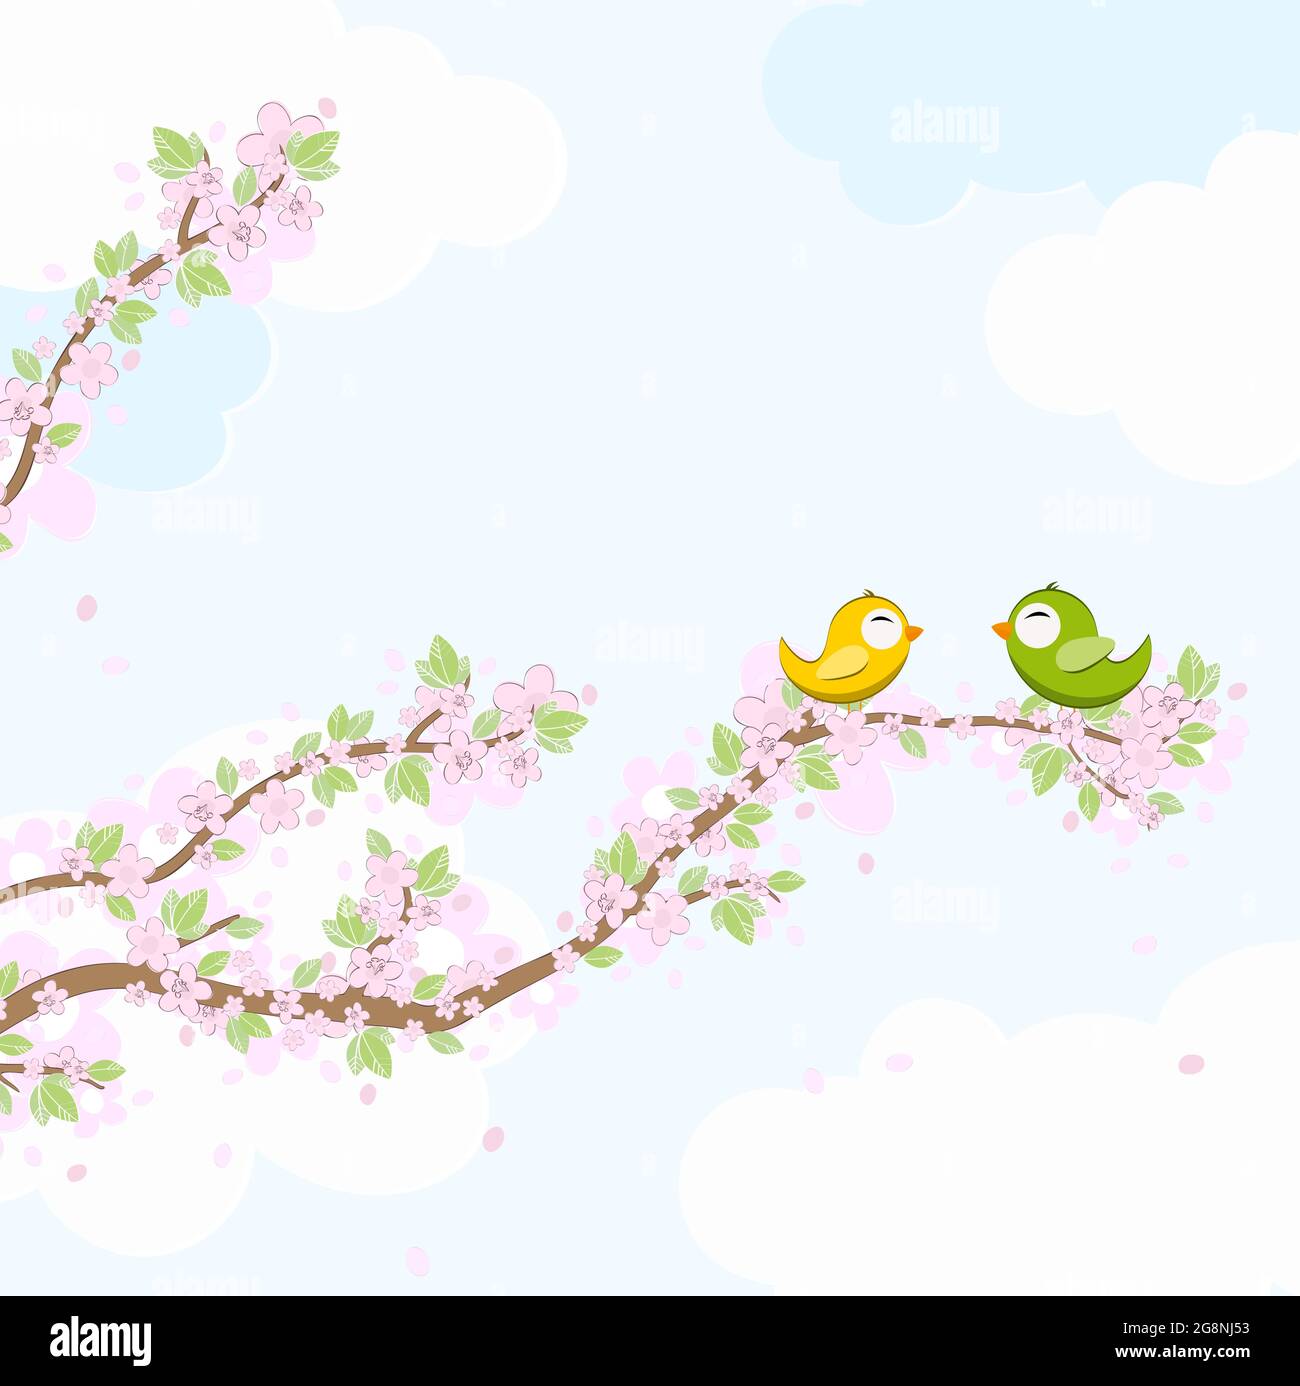 eps vector file with yellow and green colored birds in love, flying and sitting on branches with blossoms and green leaves in spring time, background Stock Vector